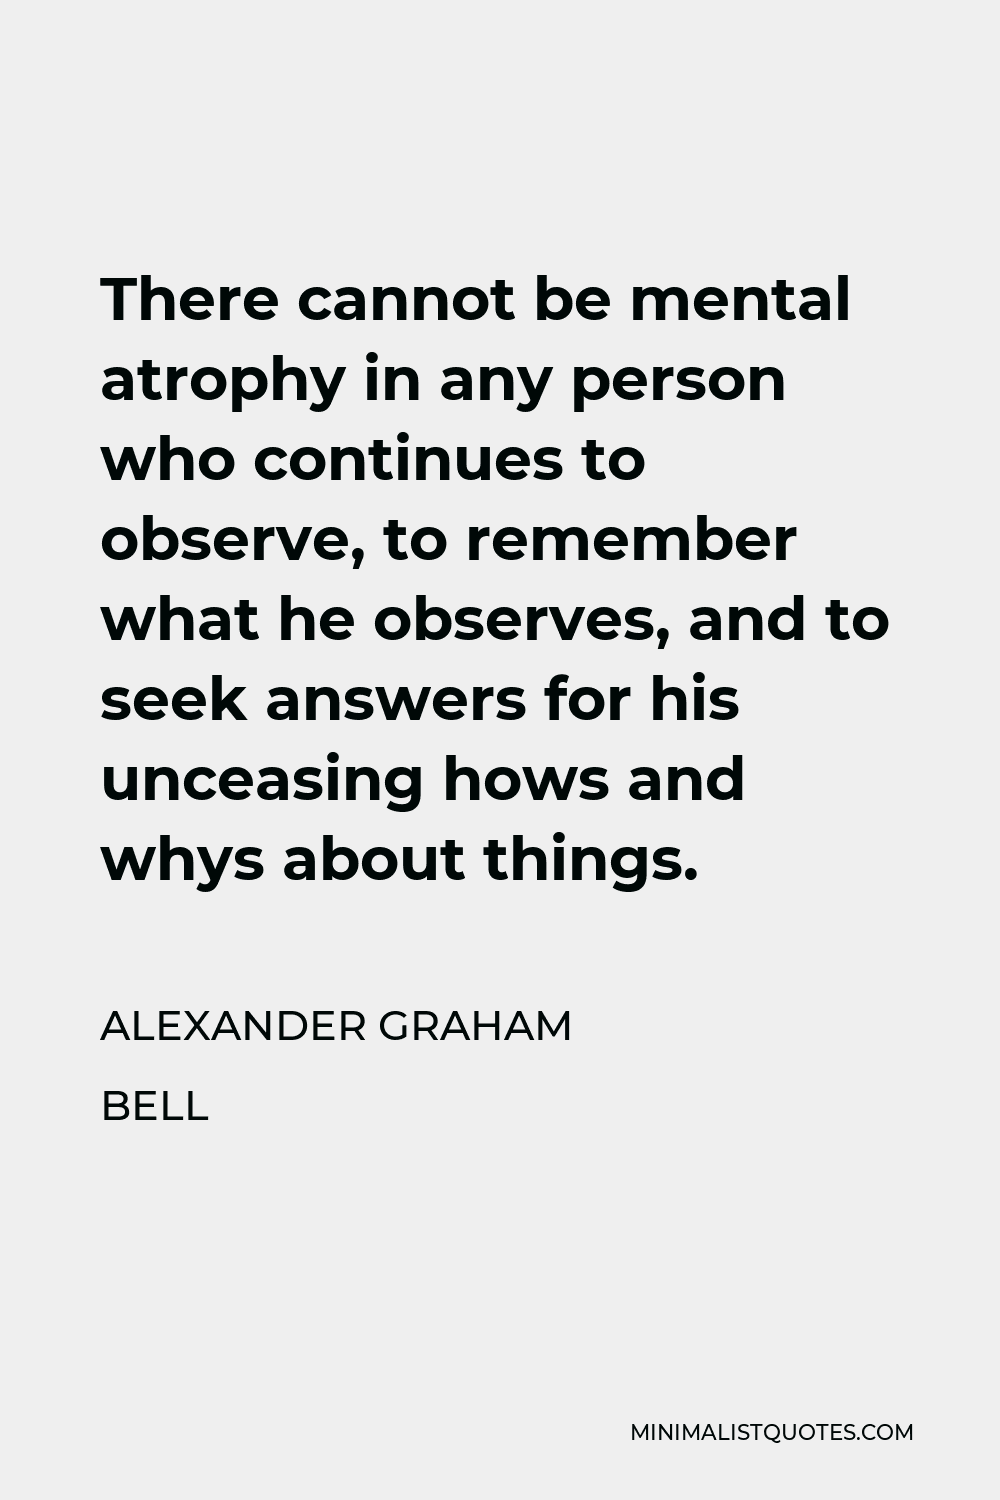 Alexander Graham Bell Quote - There cannot be mental atrophy in any person who continues to observe, to remember what he observes, and to seek answers for his unceasing hows and whys about things.